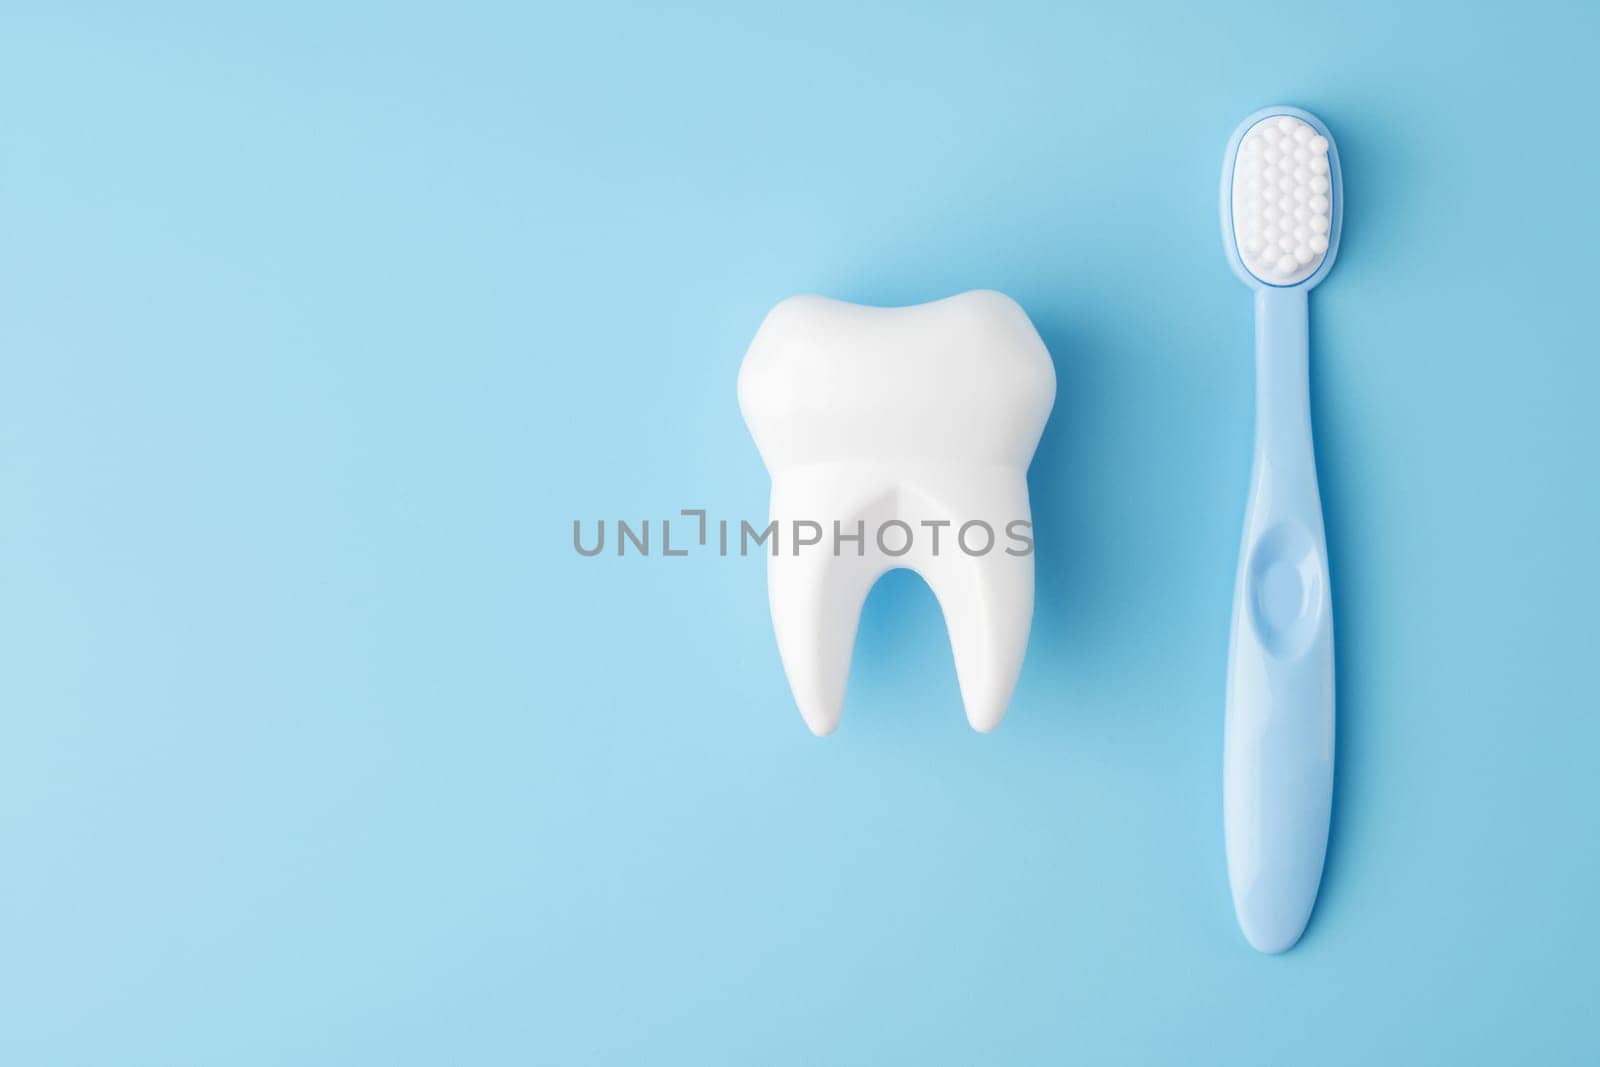 Teeth care and dental hygiene. Toy tooth and toothbrush on blue background, flat lay. Dental concept.